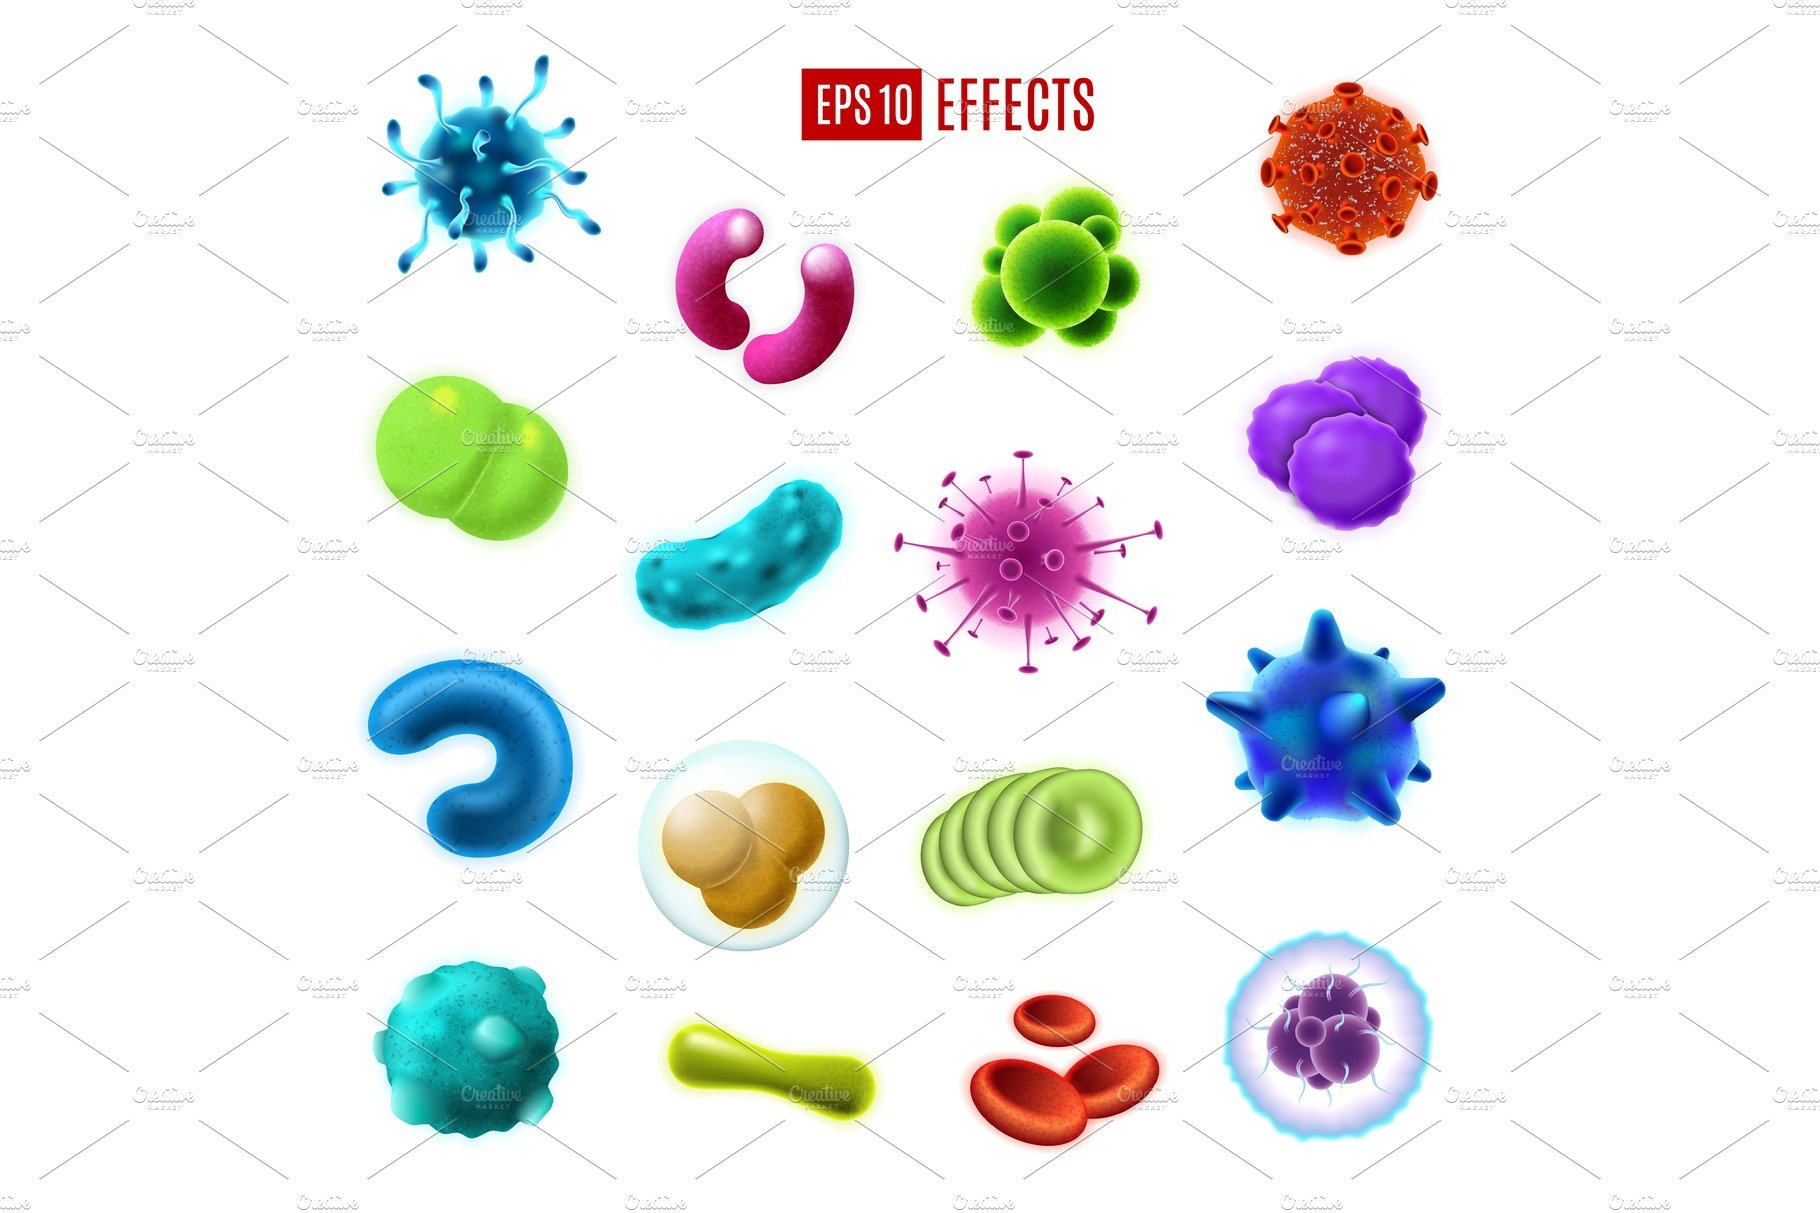 Bacteria cells, germs and viruses cover image.